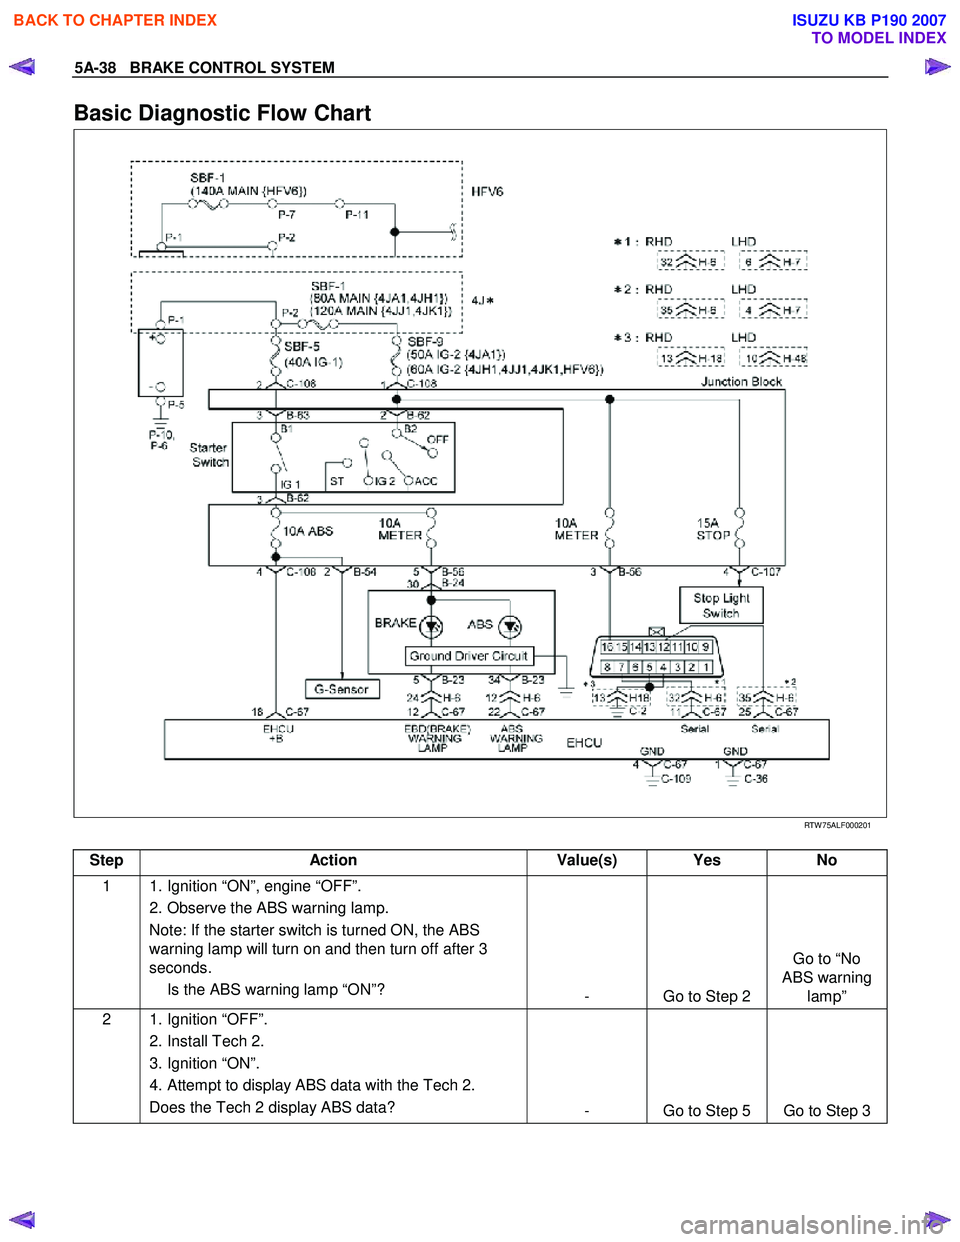 ISUZU KB P190 2007  Workshop Repair Manual 5A-38   BRAKE CONTROL SYSTEM 
Basic Diagnostic Flow Chart 
  
 
 
RTW 75ALF000201 
 Step Action  Value(s)  Yes No 
1    1. Ignition “ON”, engine “OFF”. 
  2. Observe the ABS warning lamp. Note